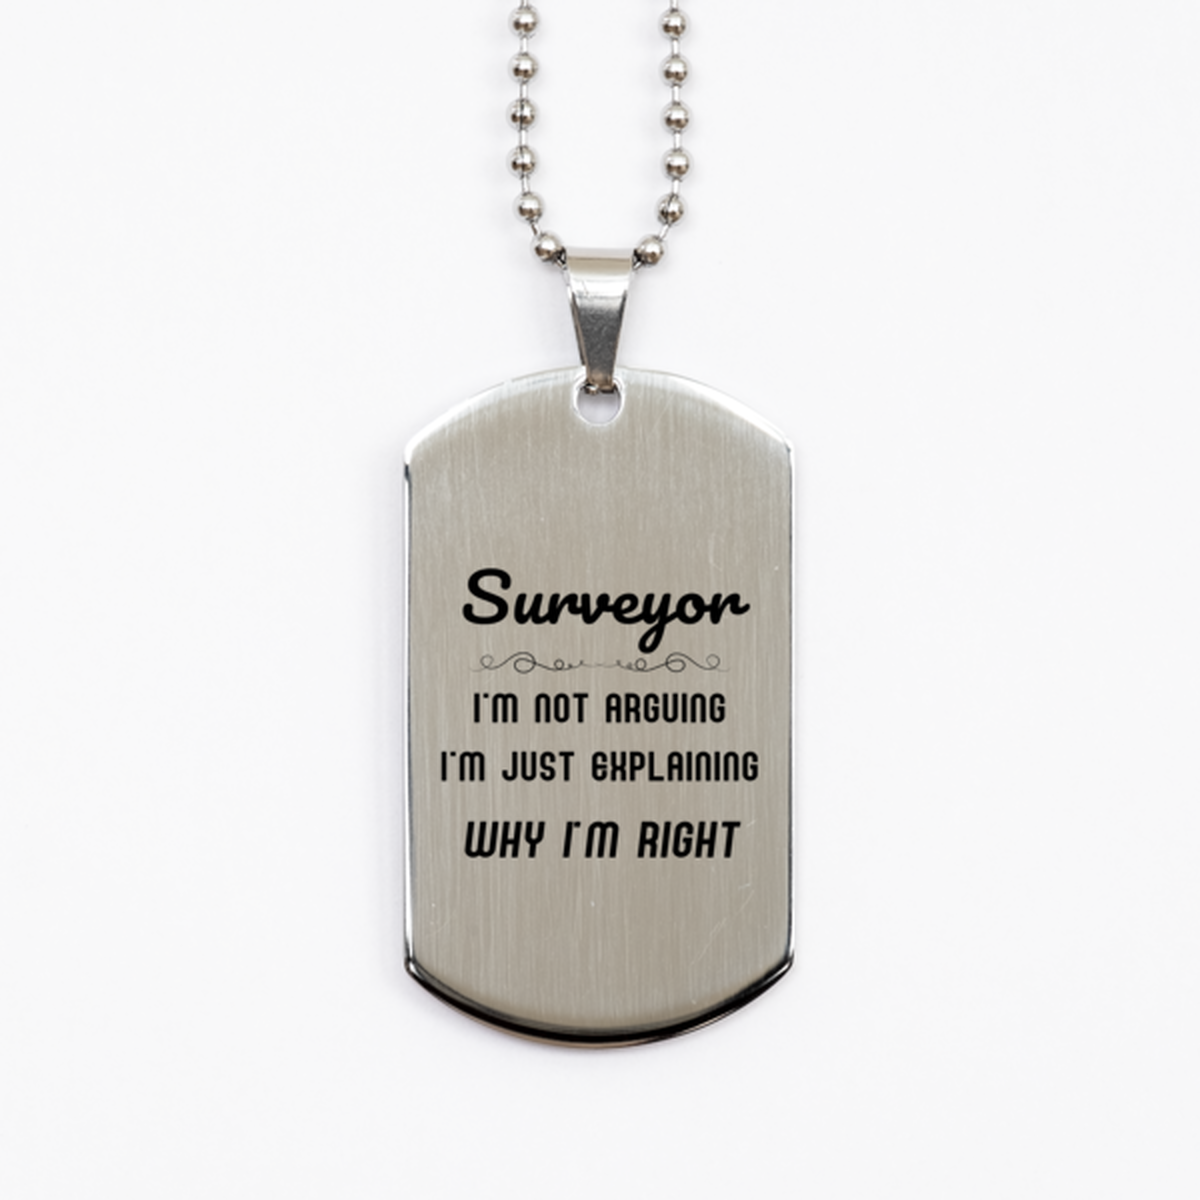 Surveyor I'm not Arguing. I'm Just Explaining Why I'm RIGHT Silver Dog Tag, Funny Saying Quote Surveyor Gifts For Surveyor Graduation Birthday Christmas Gifts for Men Women Coworker